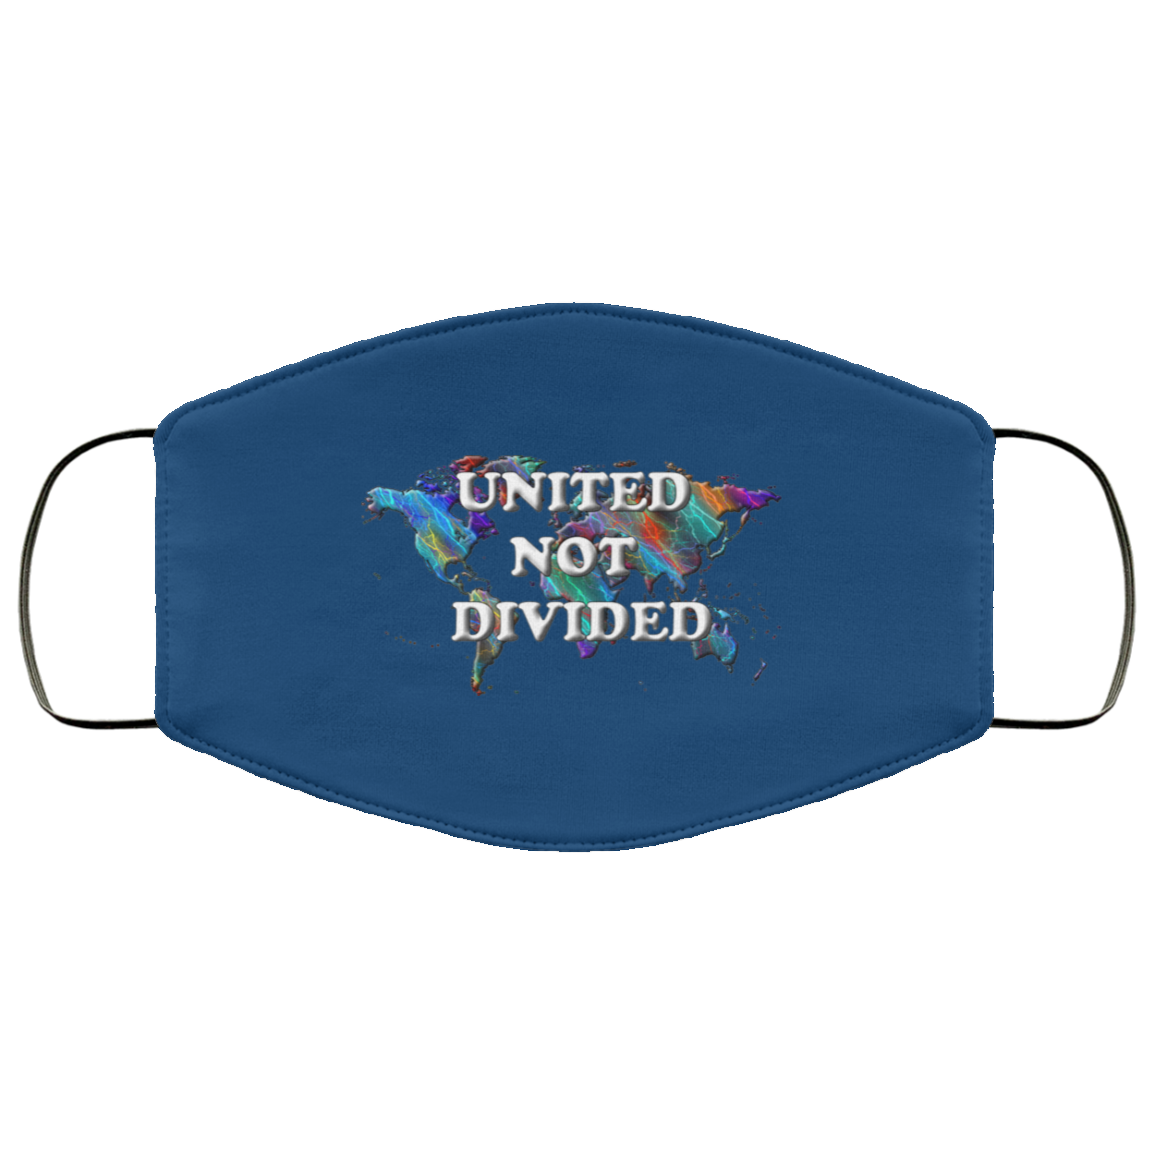 United Not Divided 2 Layer Face Mask